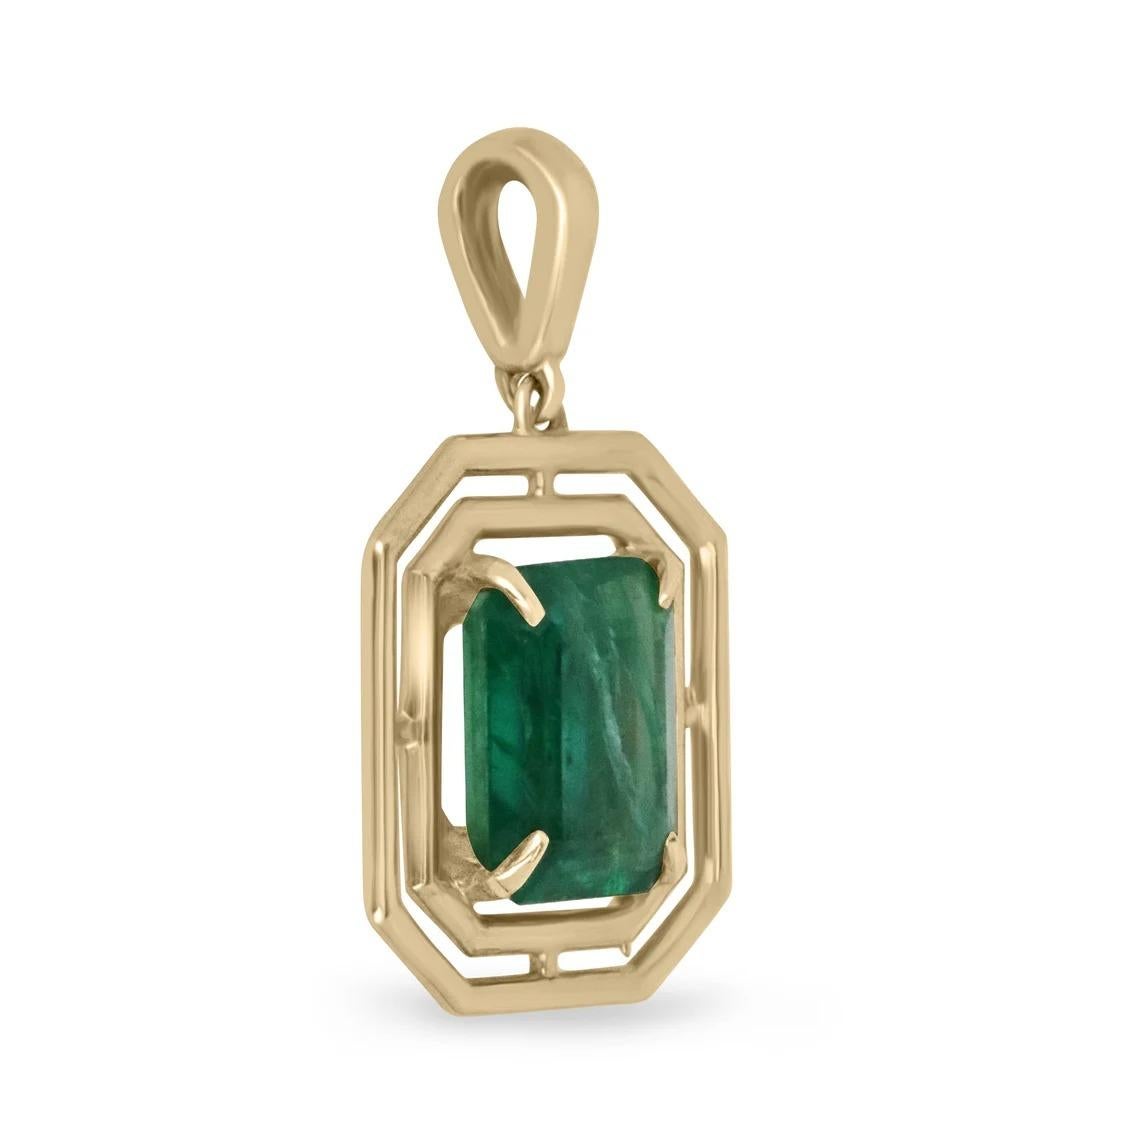 Featured is an absolutely stunning, and one-of-a-kind natural emerald pendant. The gemstone is a natural, 3.18-carat, Zambian emerald cut emerald with ravishing characteristics such as its vivid dark green color, very good transparency, excellent